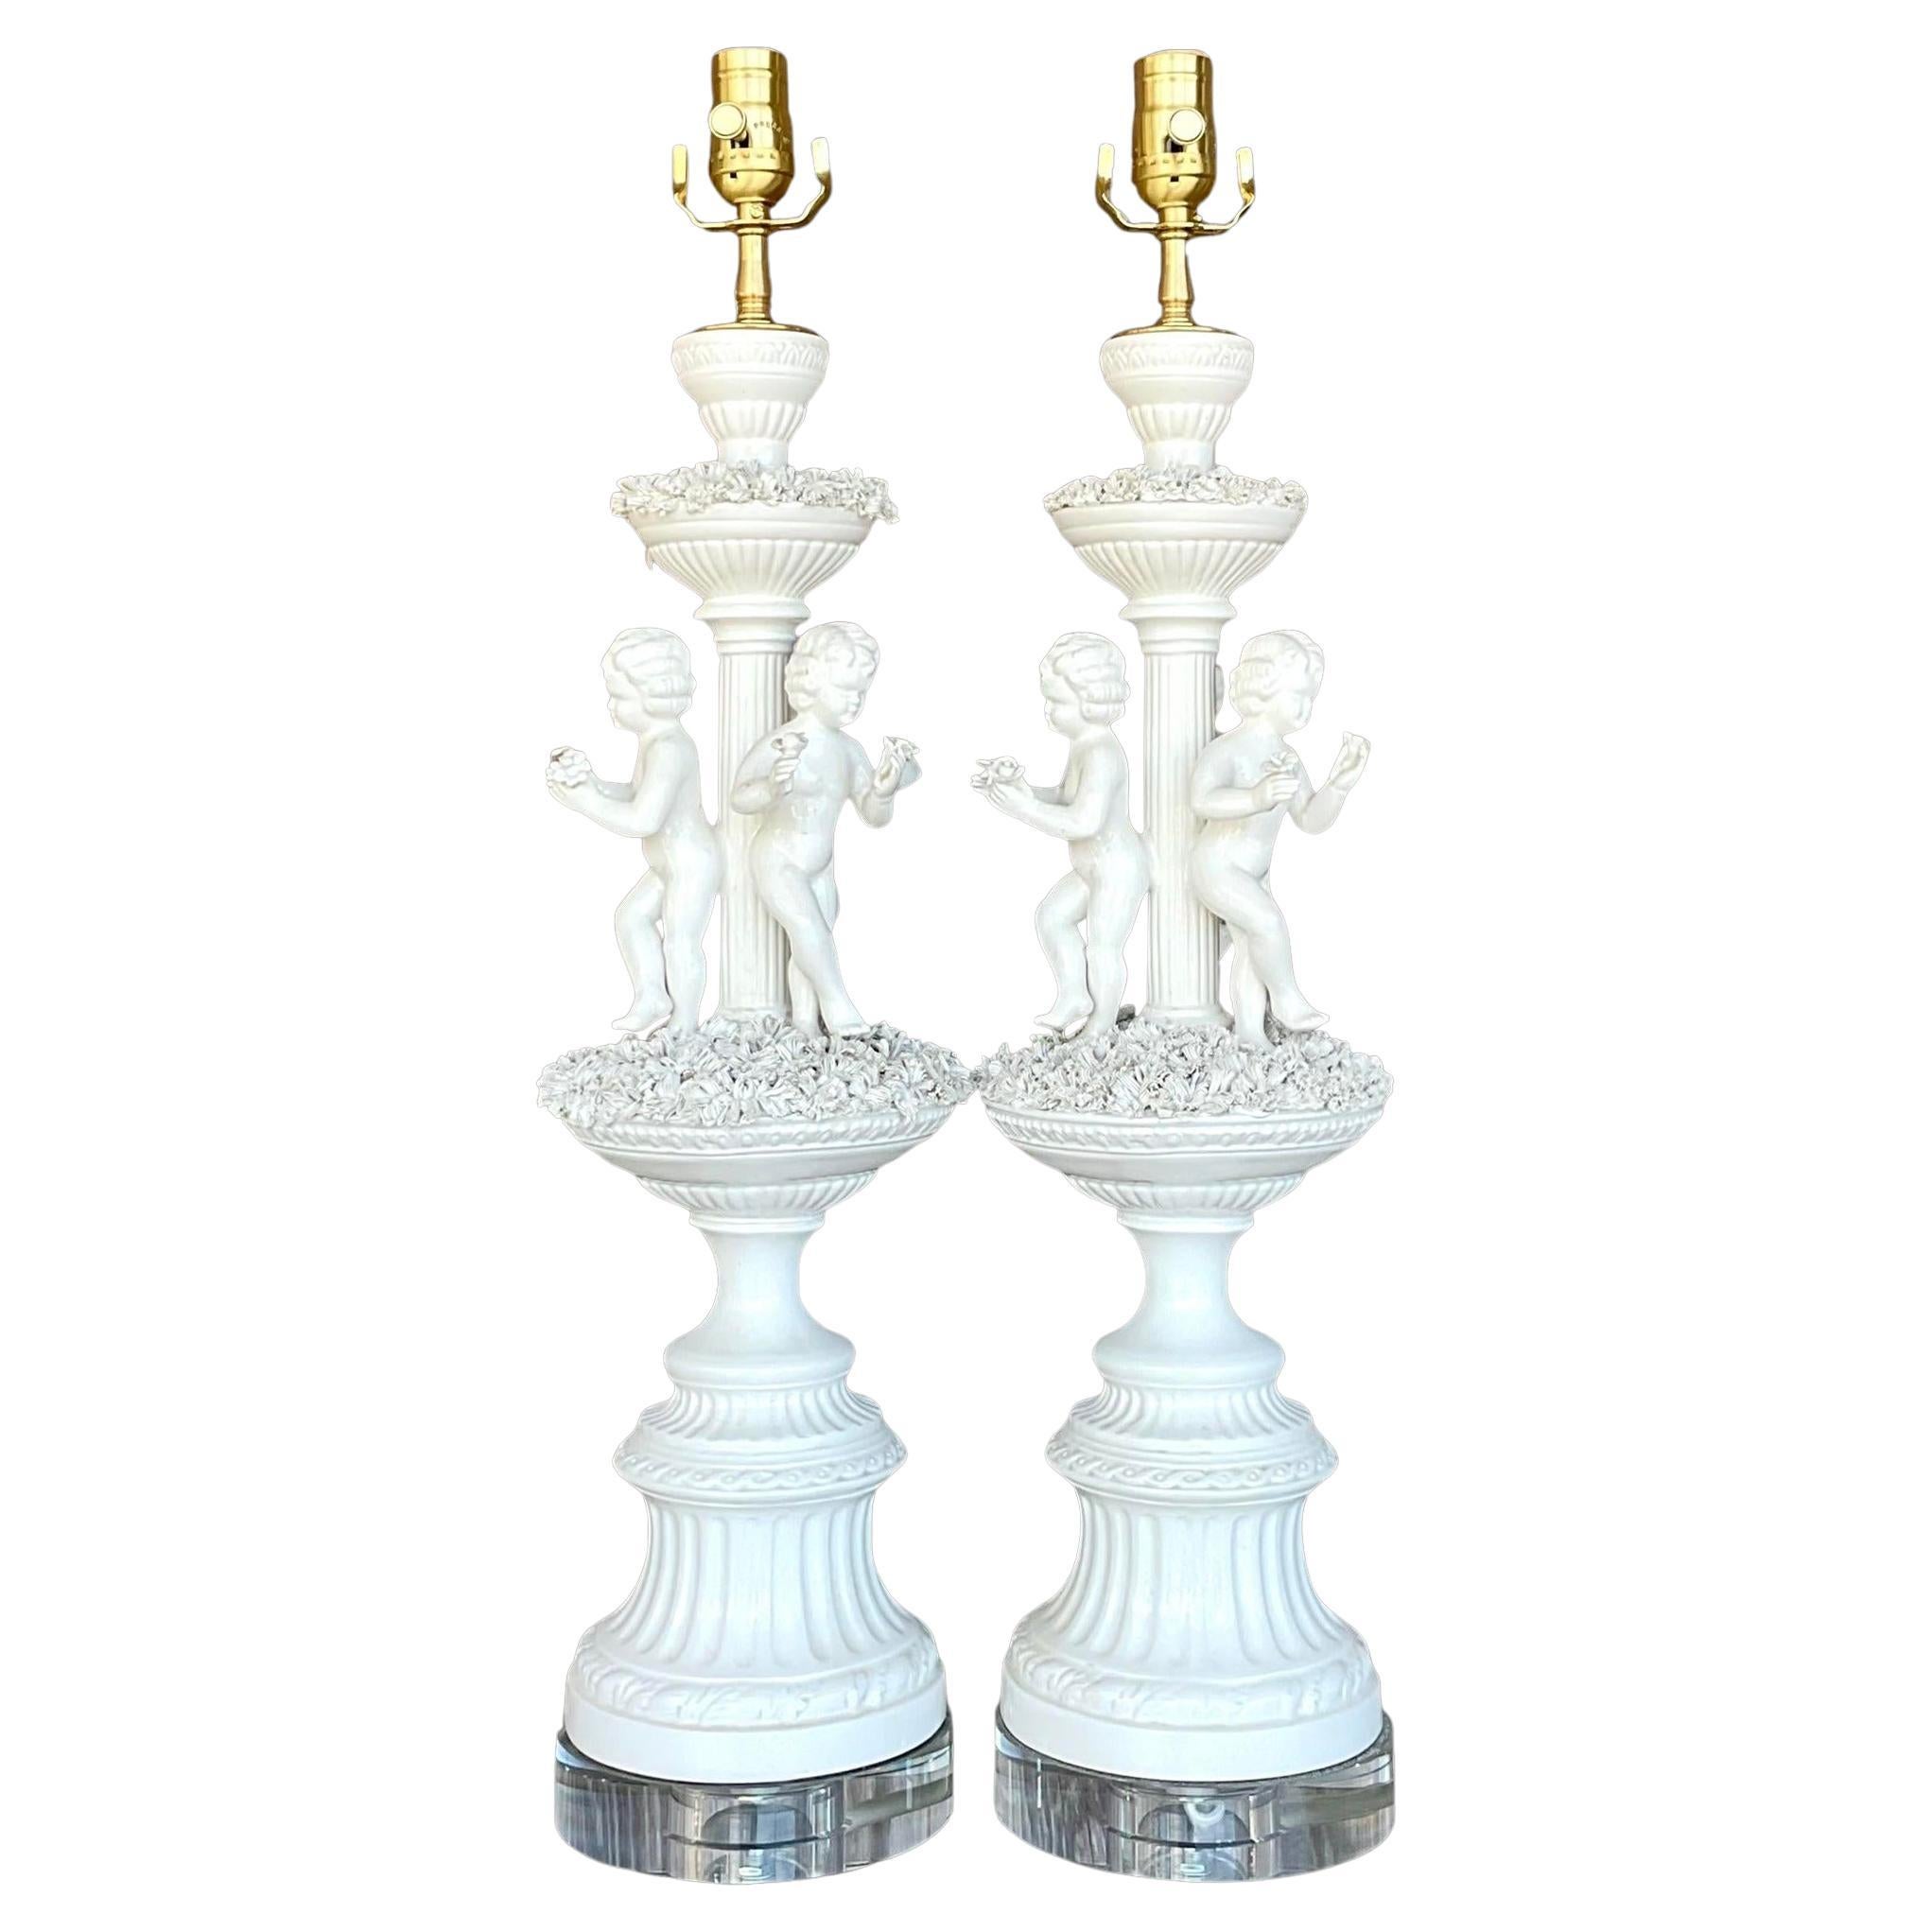 Vintage Regency Glazed Ceramic Putti Style Lamps - a Pair For Sale